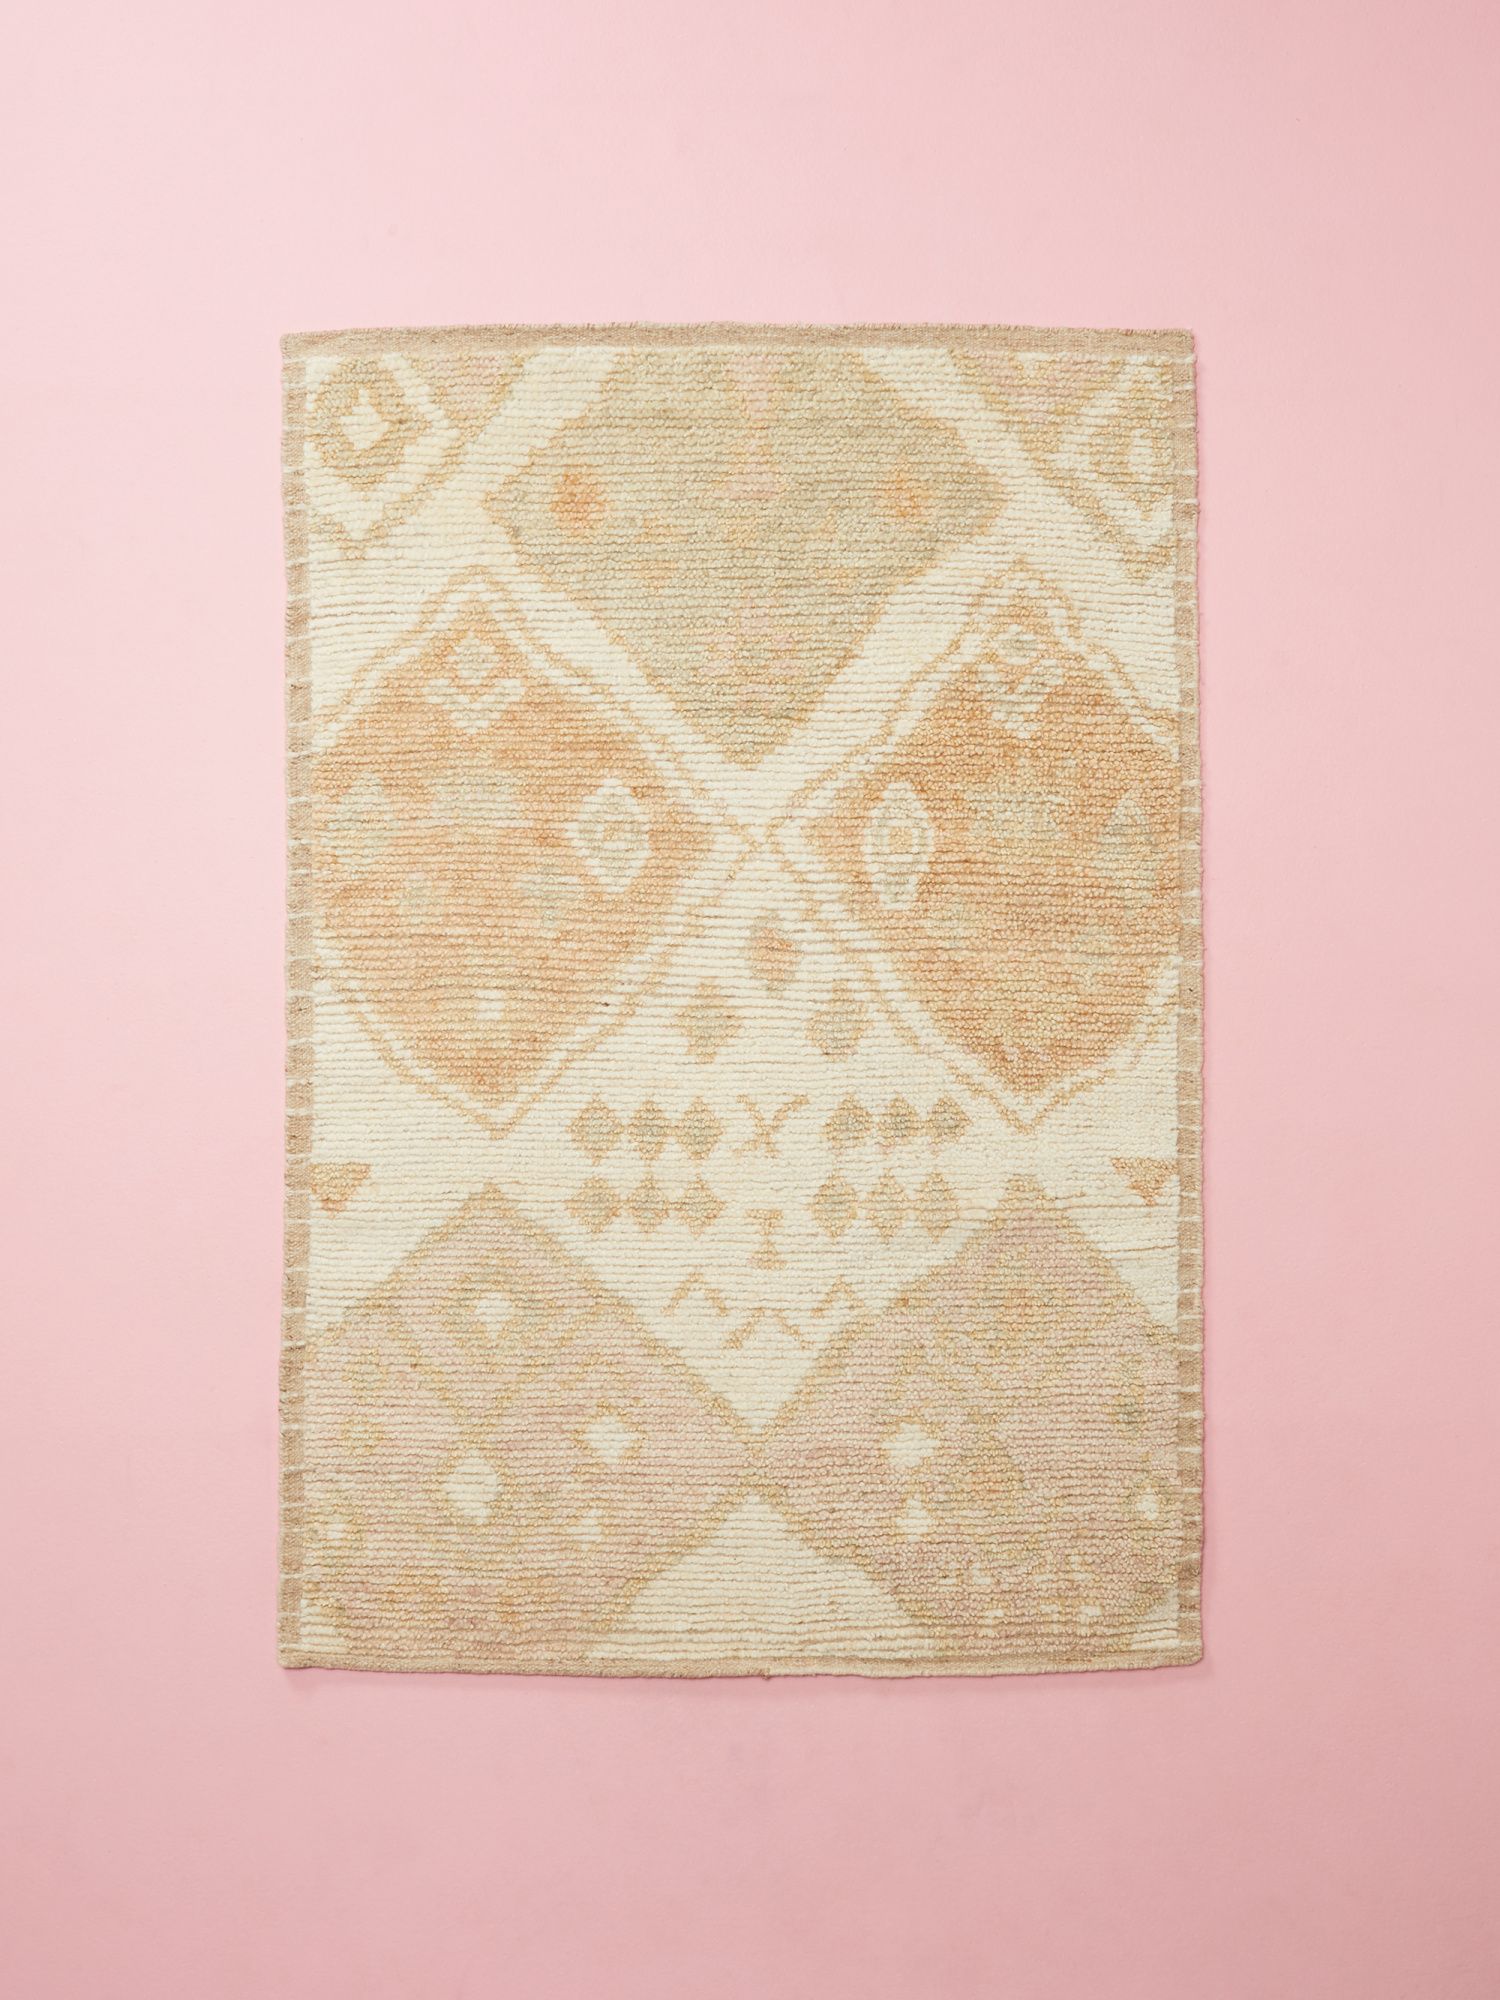 4x6 Wool Hand Knotted Diamond Patterned Area Rug | Rugs | HomeGoods | HomeGoods